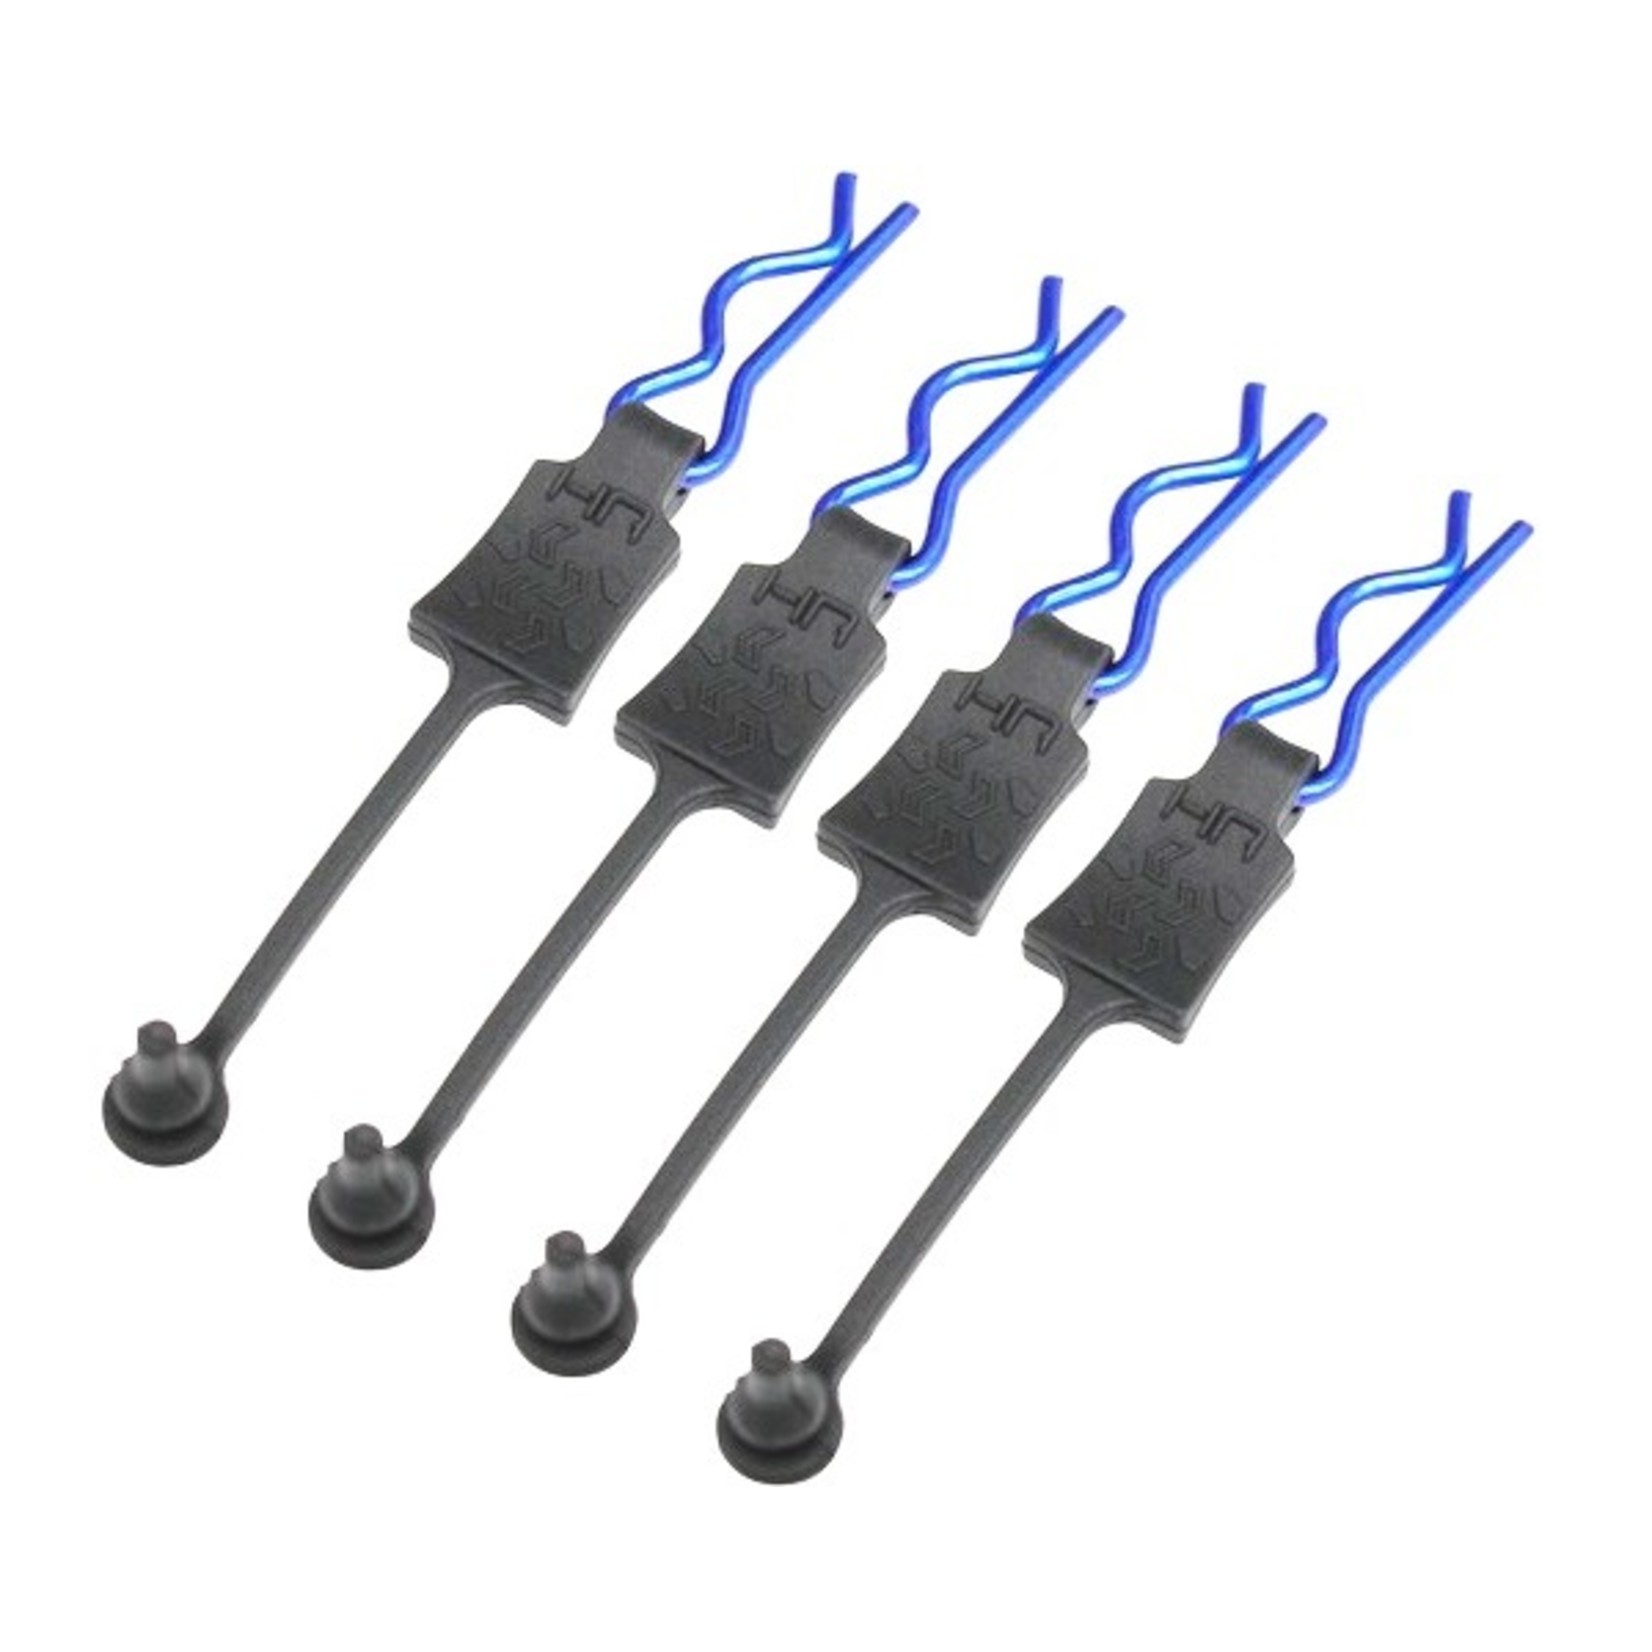 Hot Racing HRABWP39E06  BWP39E06 Body Clip Retainers, 1/8th Scale, Blue (4)